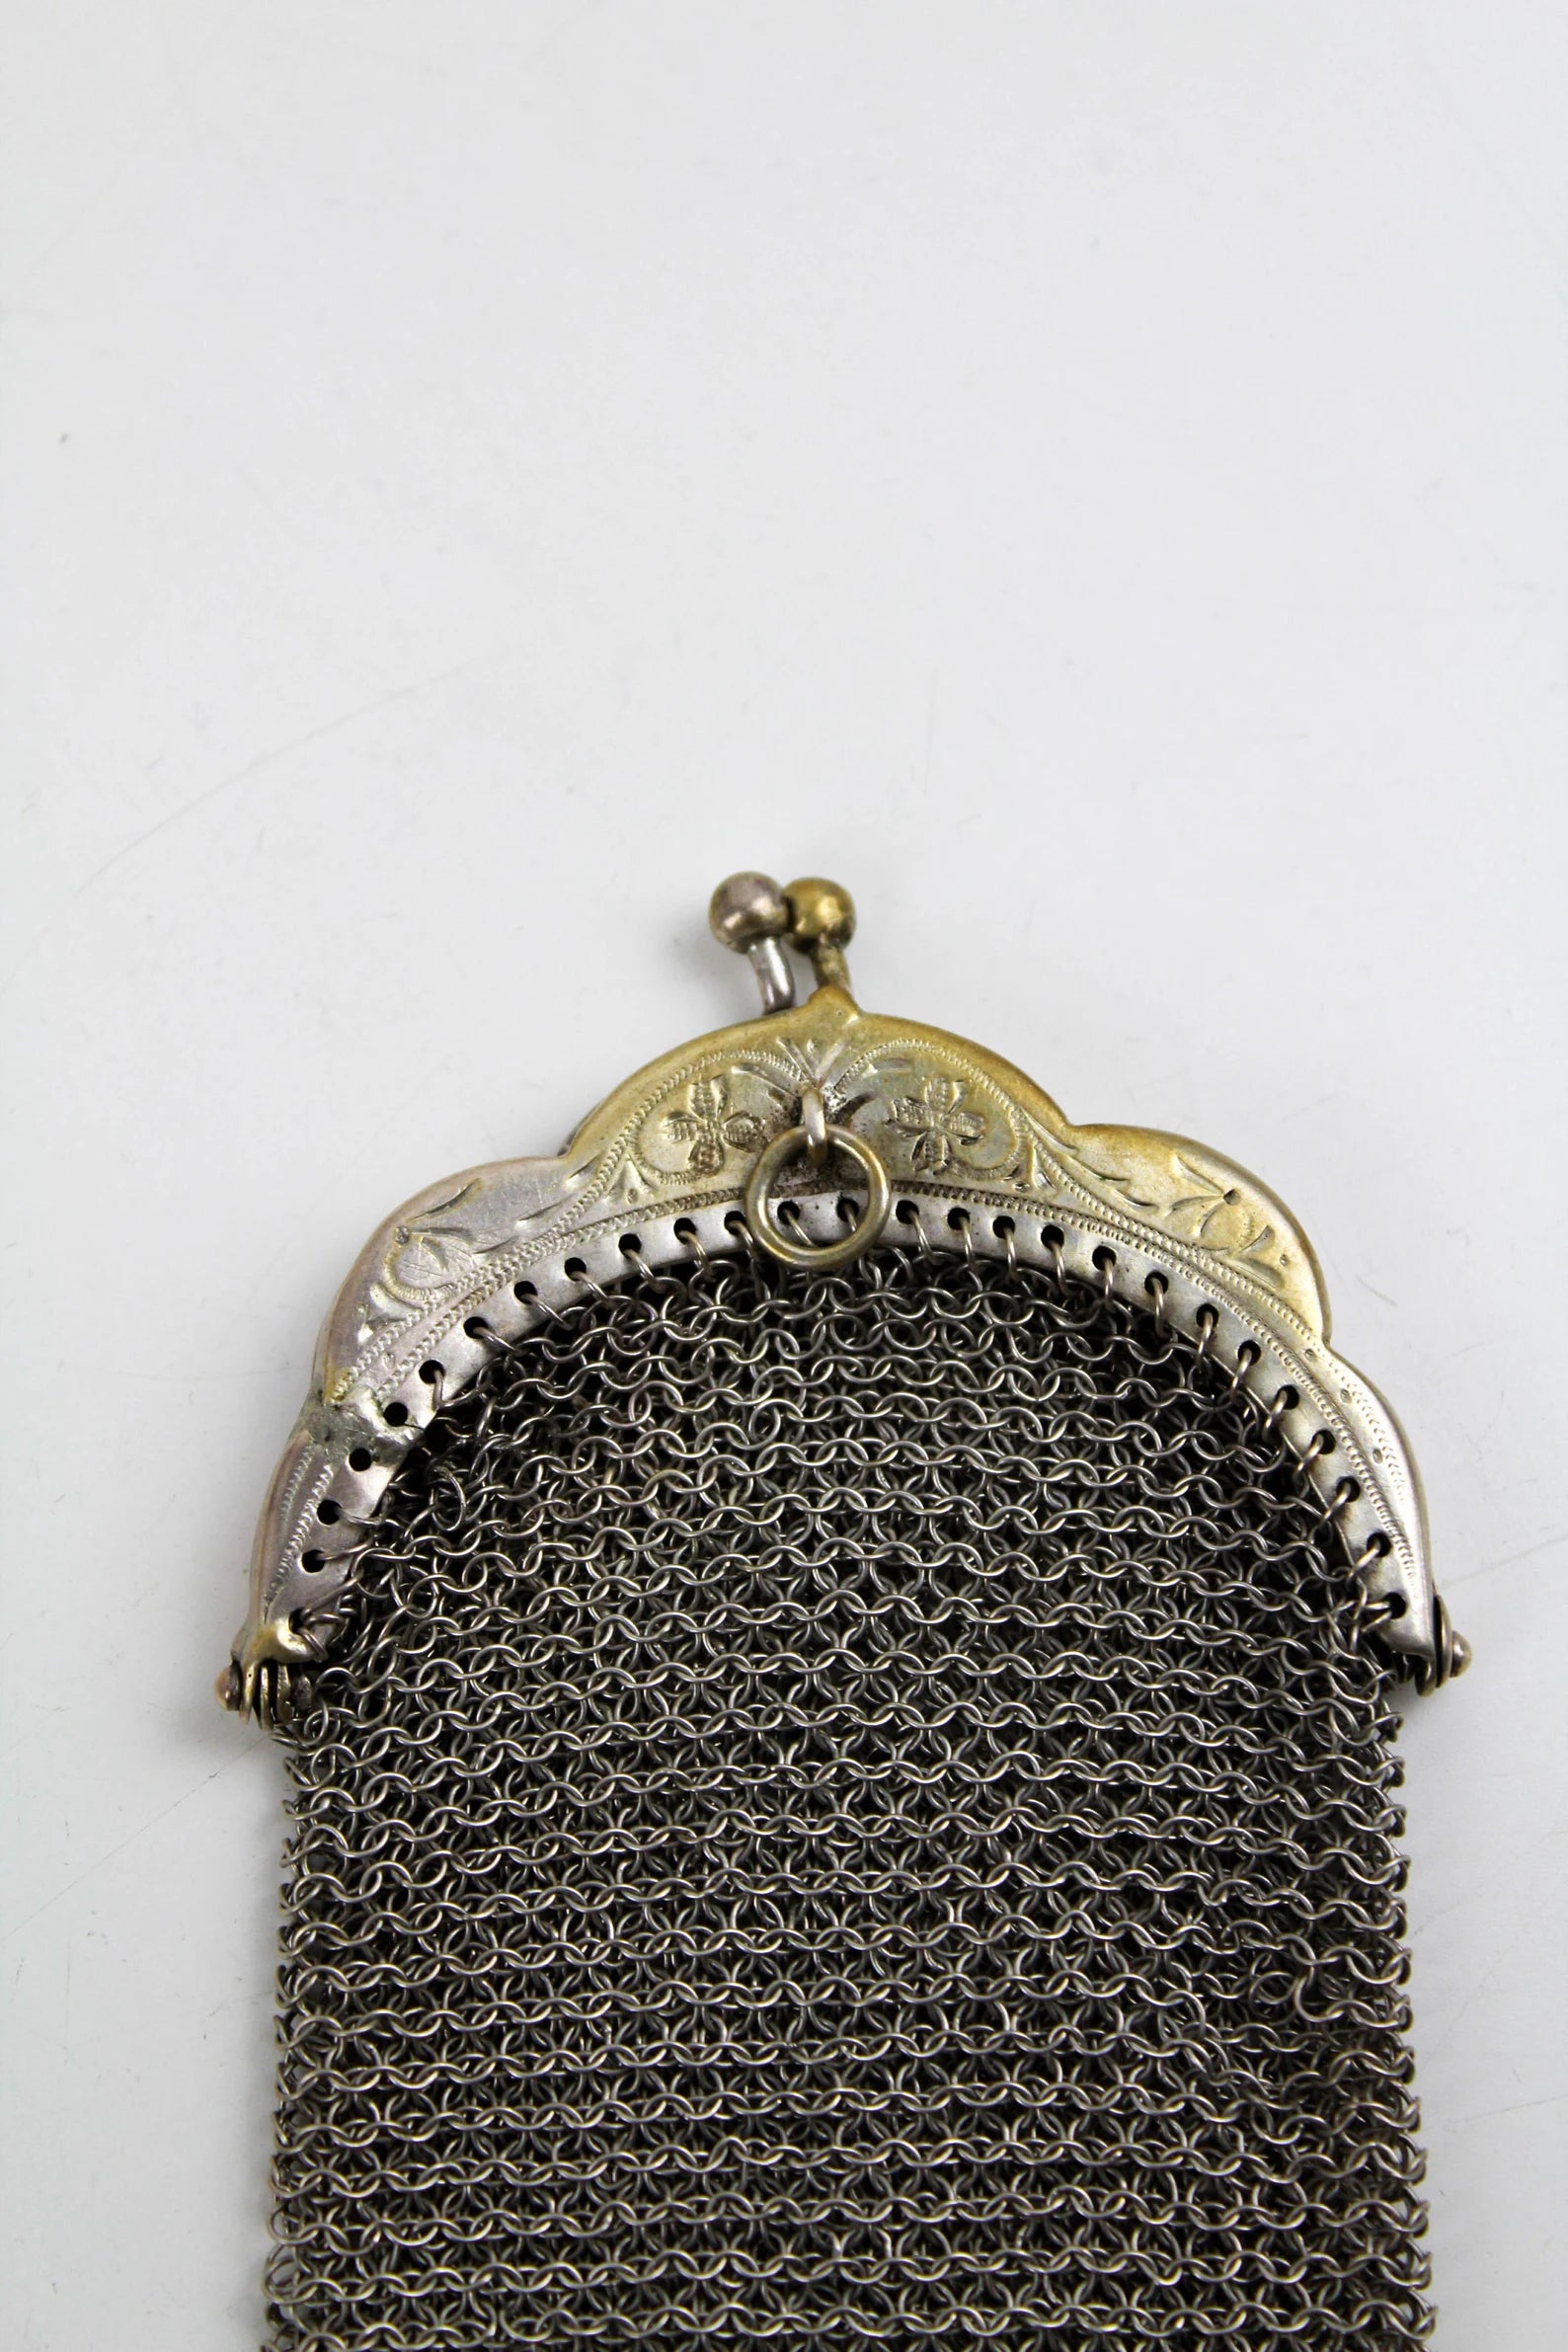 Vintage Sterling Silver Chain Mail Mesh Bag Small Coin Purse | eBay